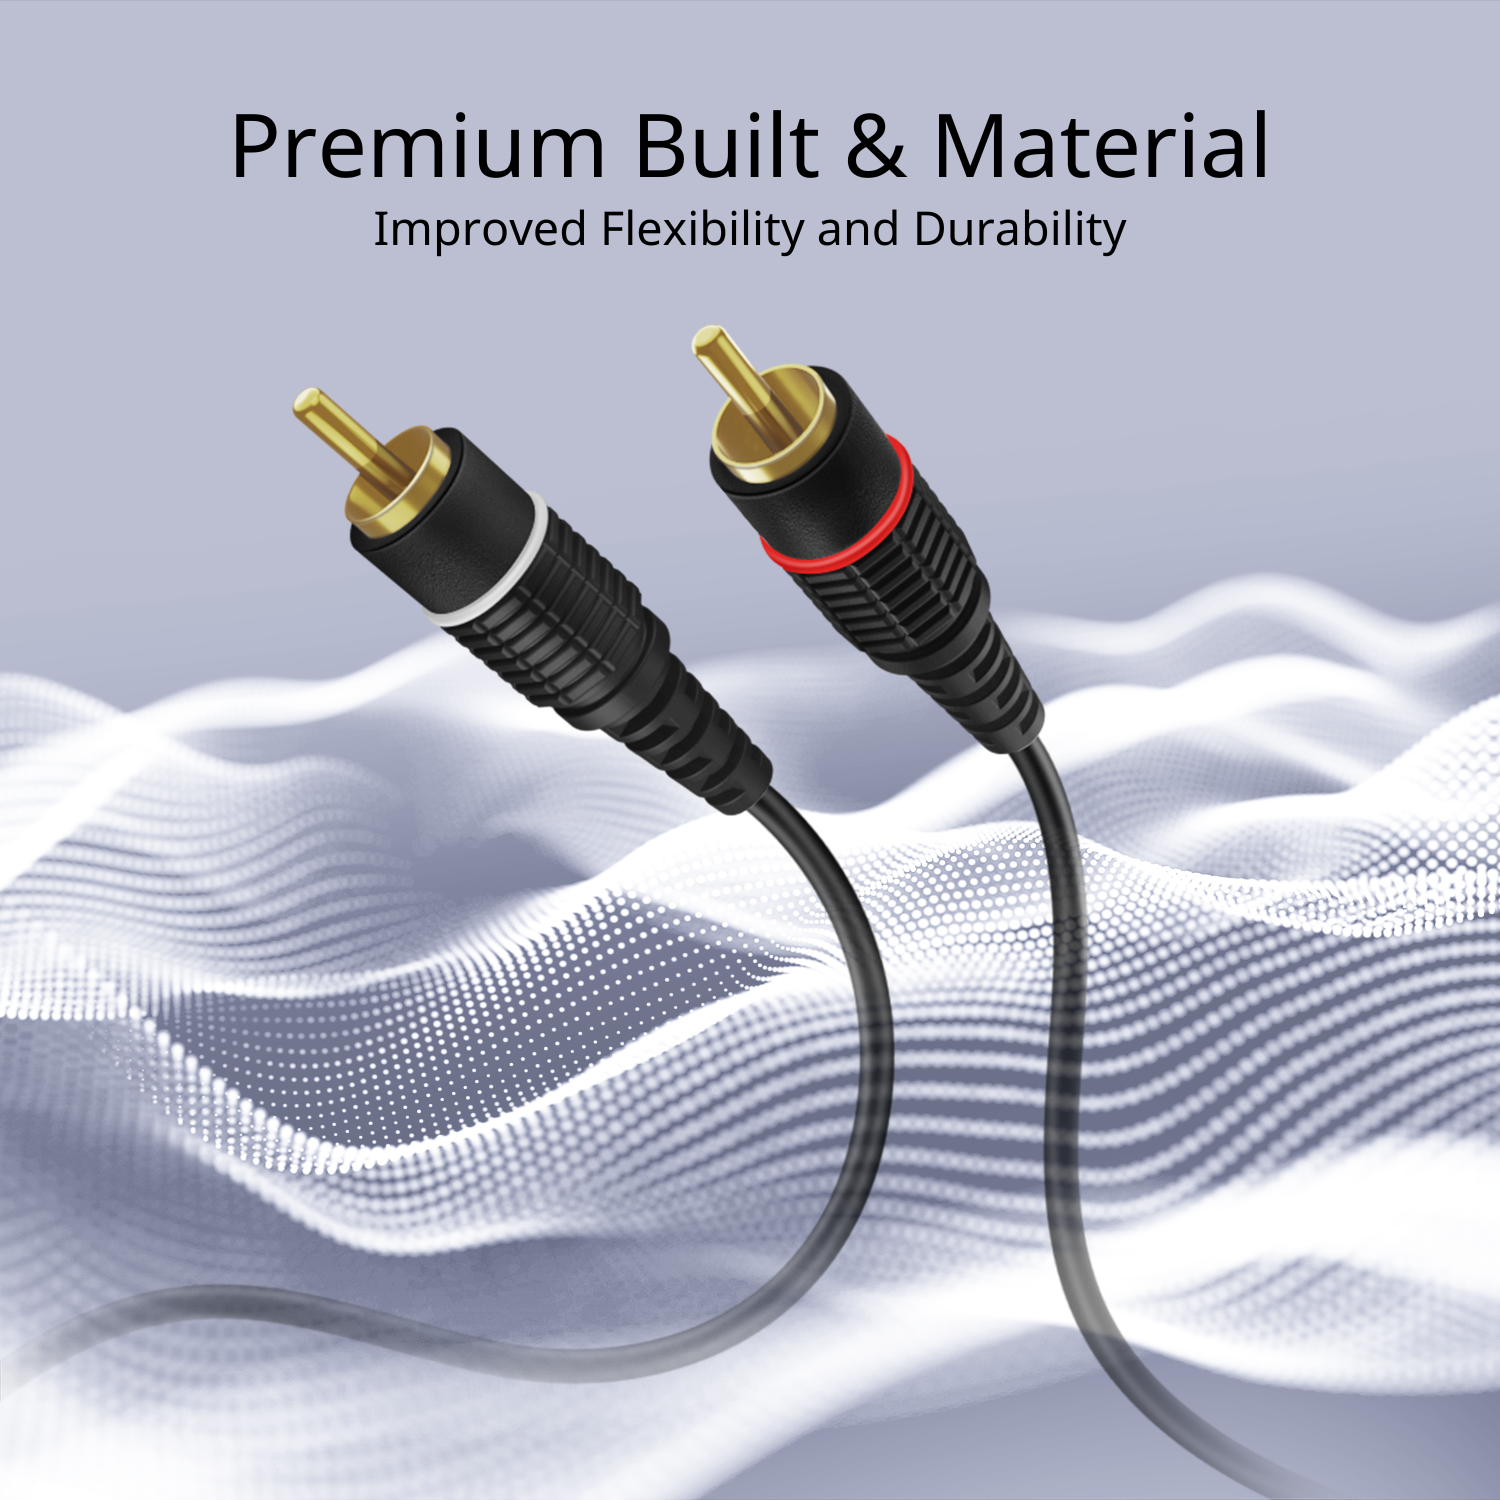 2RCA Stereo Audio Cable (6 Feet) - Dual RCA Plug M/M 2 Channel (Right and Left) Gold Plated Dual Shielded RCA to RCA Male Connectors Black - image 3 of 6